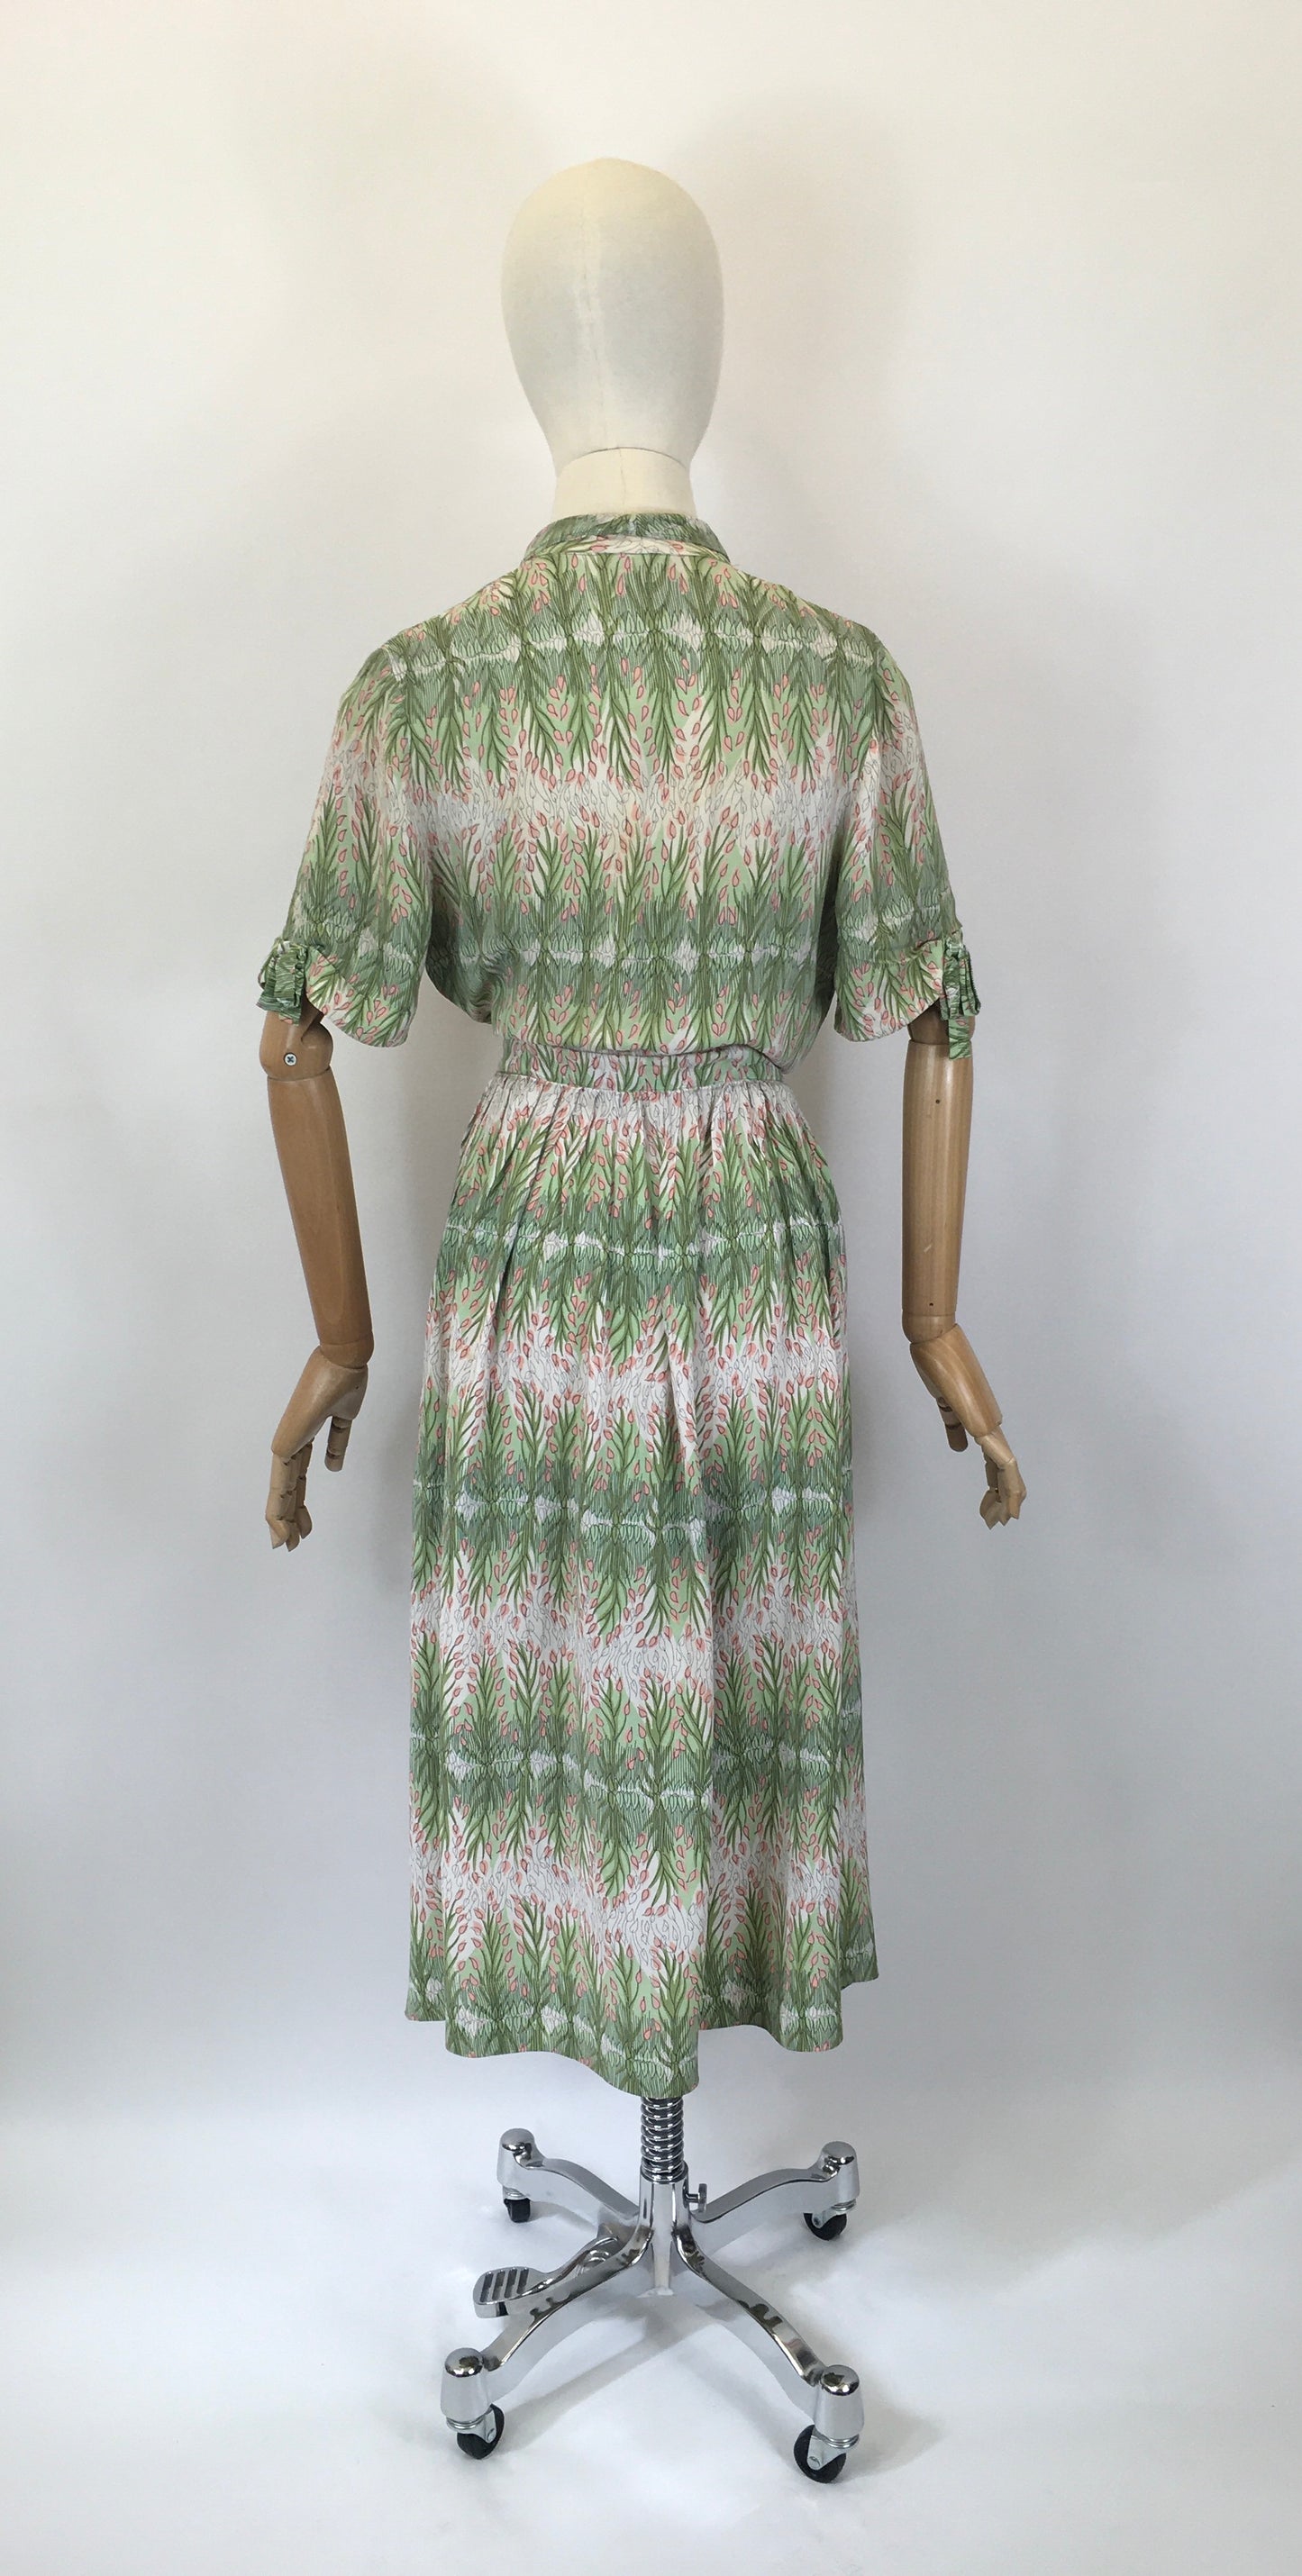 Original 1940’s Stunning Rayon Crepe Dress - In the Prettiest Floral in Powdered Rose and Green